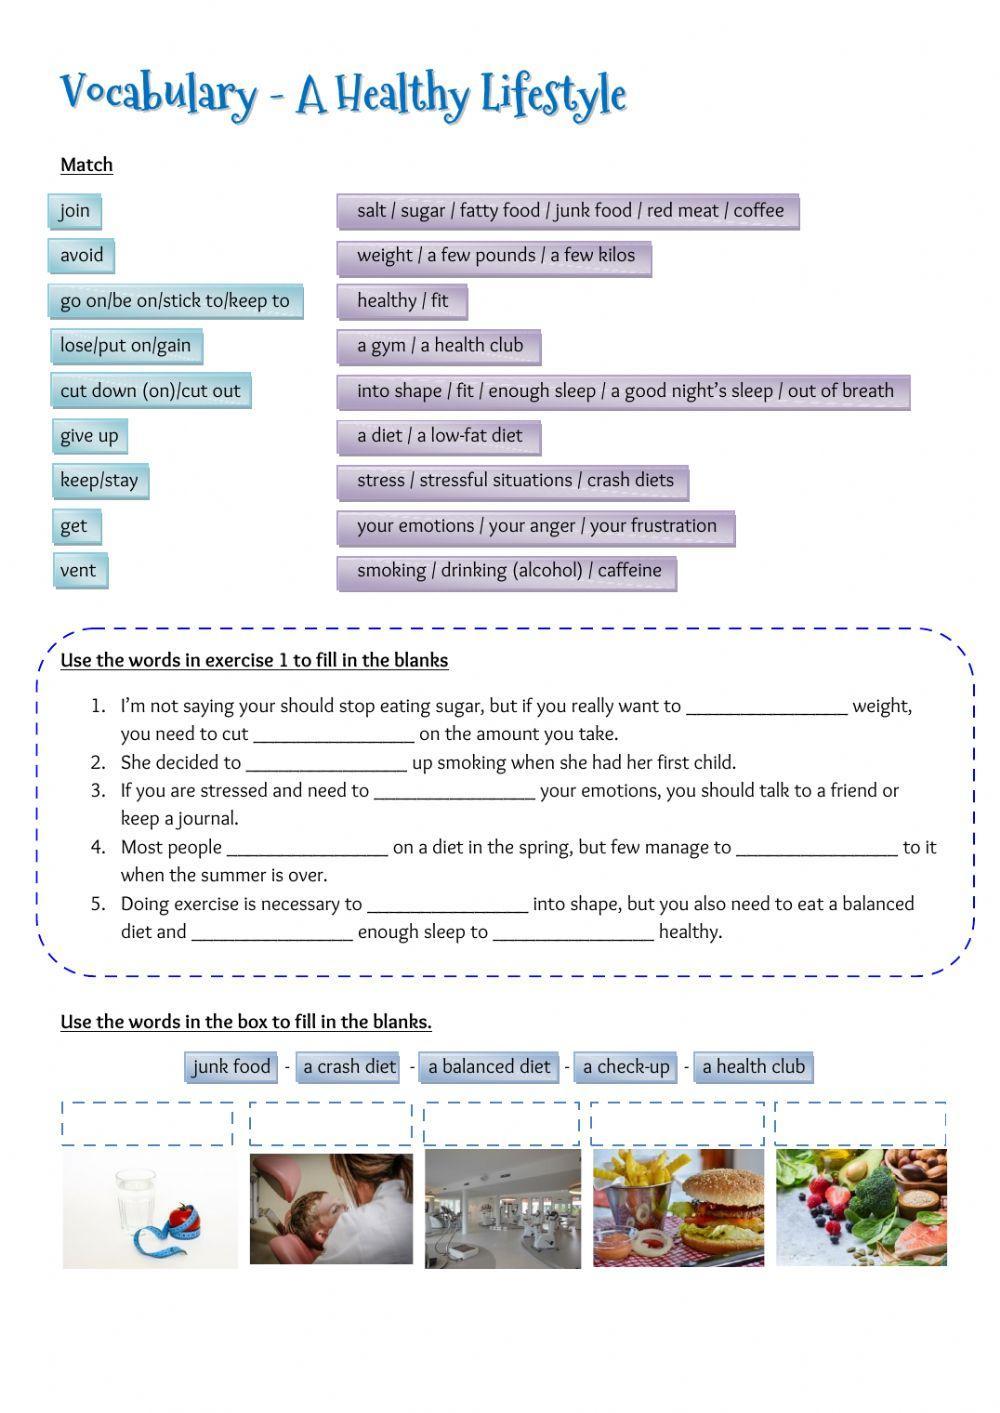 Vocabulary - A healthy lifestyle worksheet | Live Worksheets